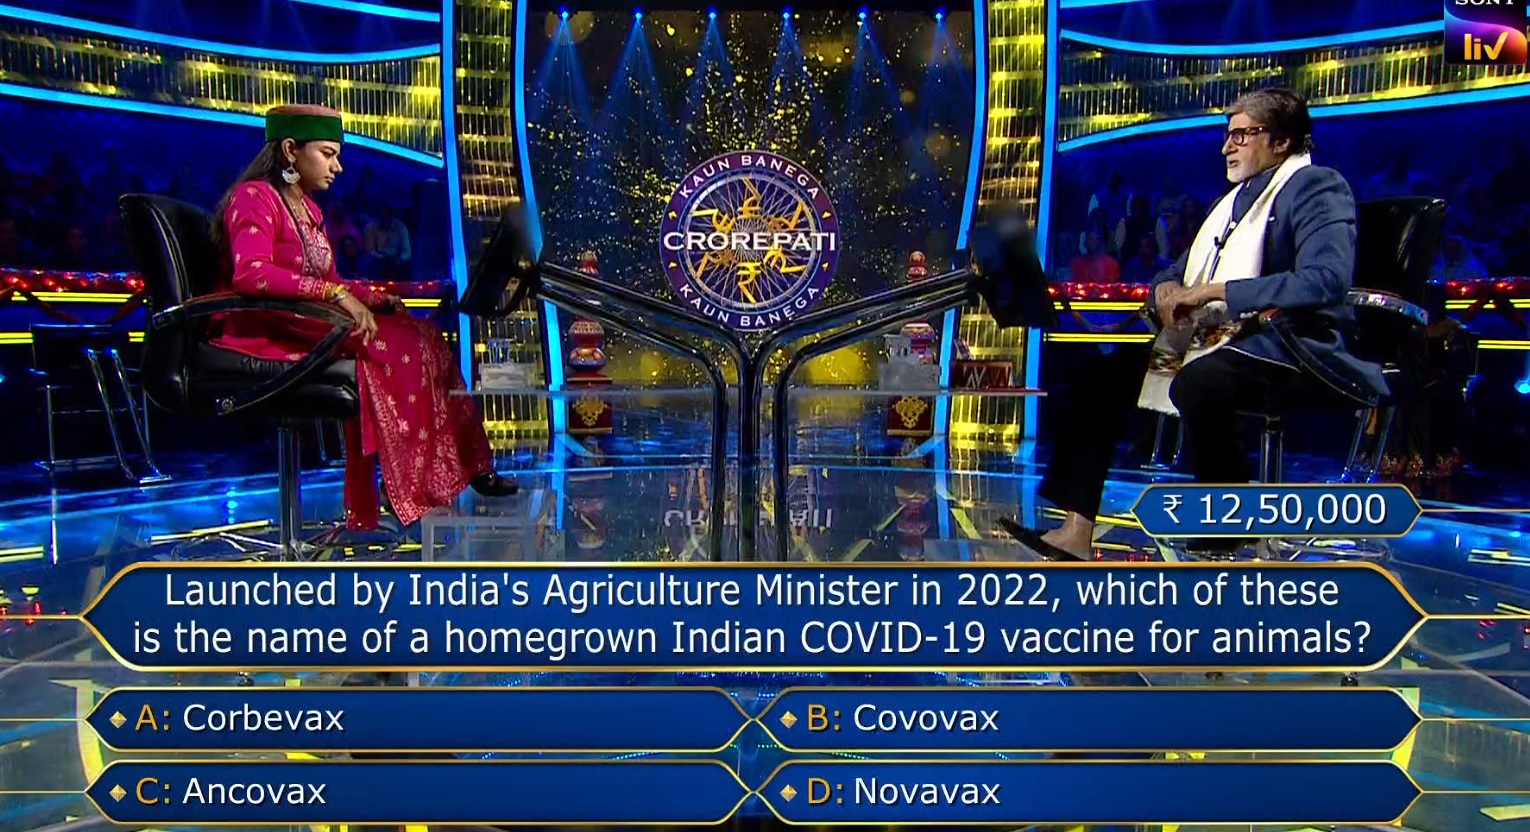 Ques : Launched by India’s Agriculture Minister in 2022, which of these is the name of a homegrown Indian COVID-19 vaccine for animals?